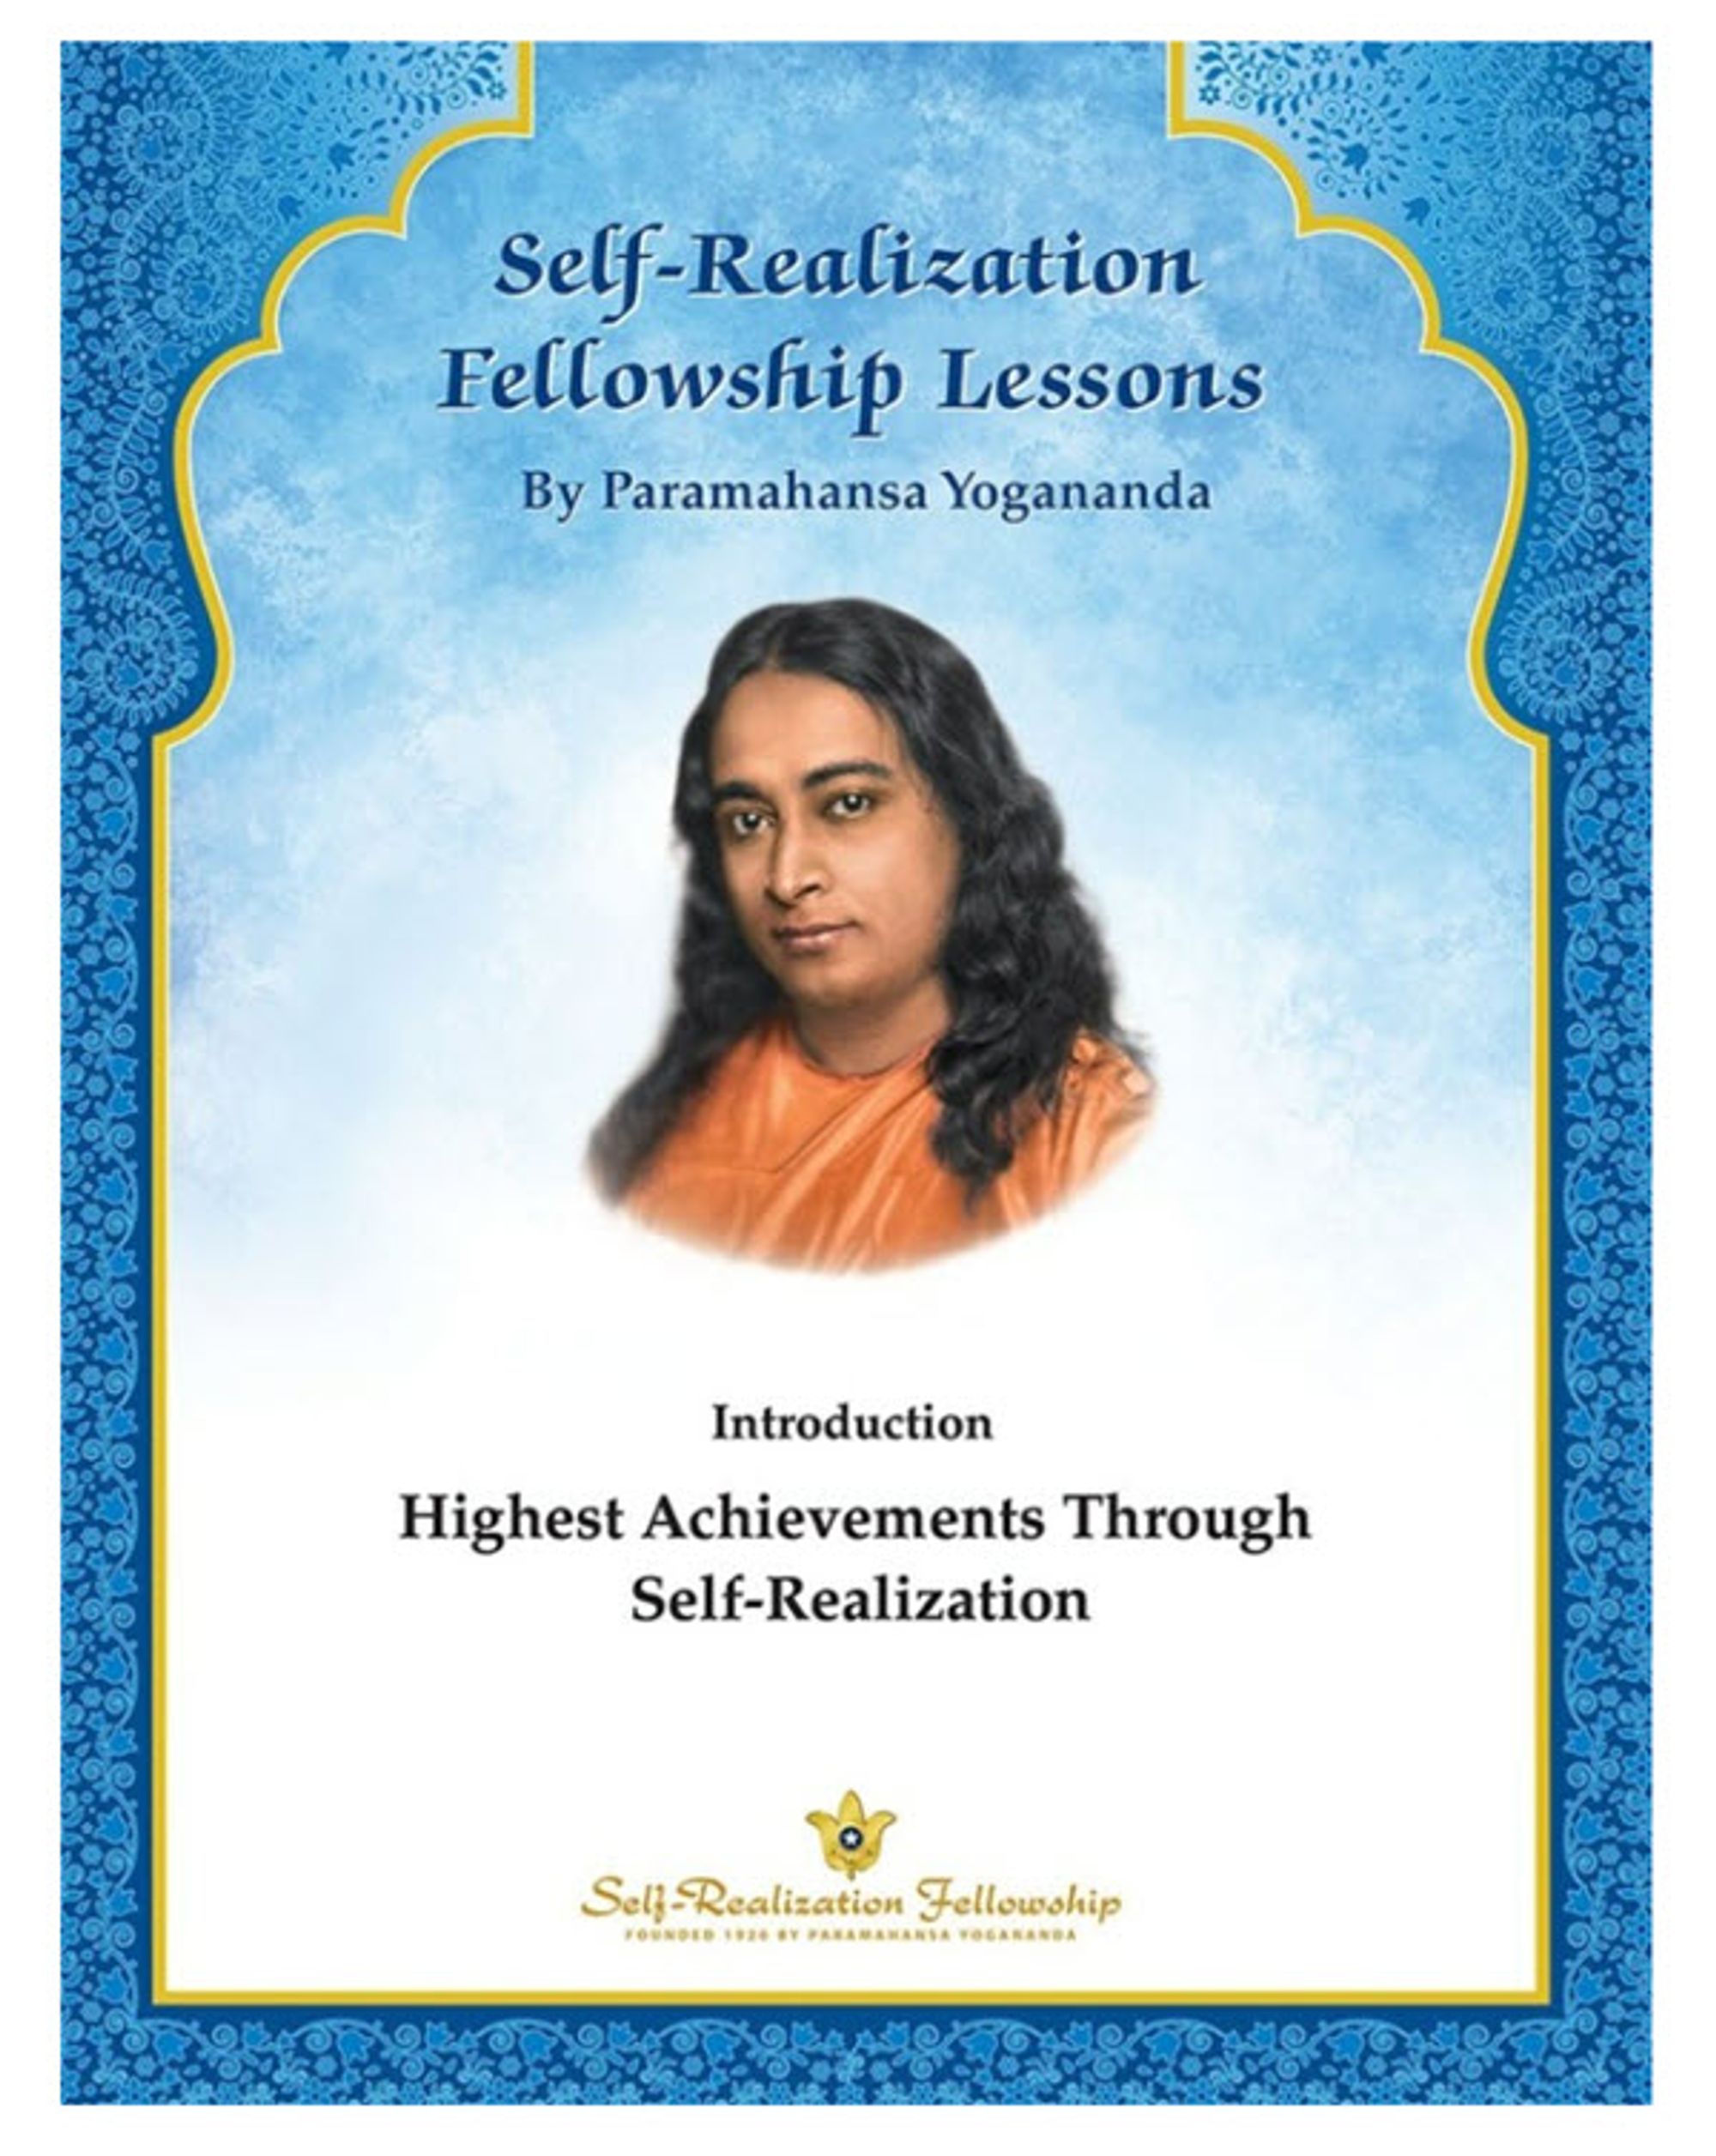 The meditation techniques taught by Paramahansa Yogananda are available through the SRF headquarters as home study lessons. Click here for more details.